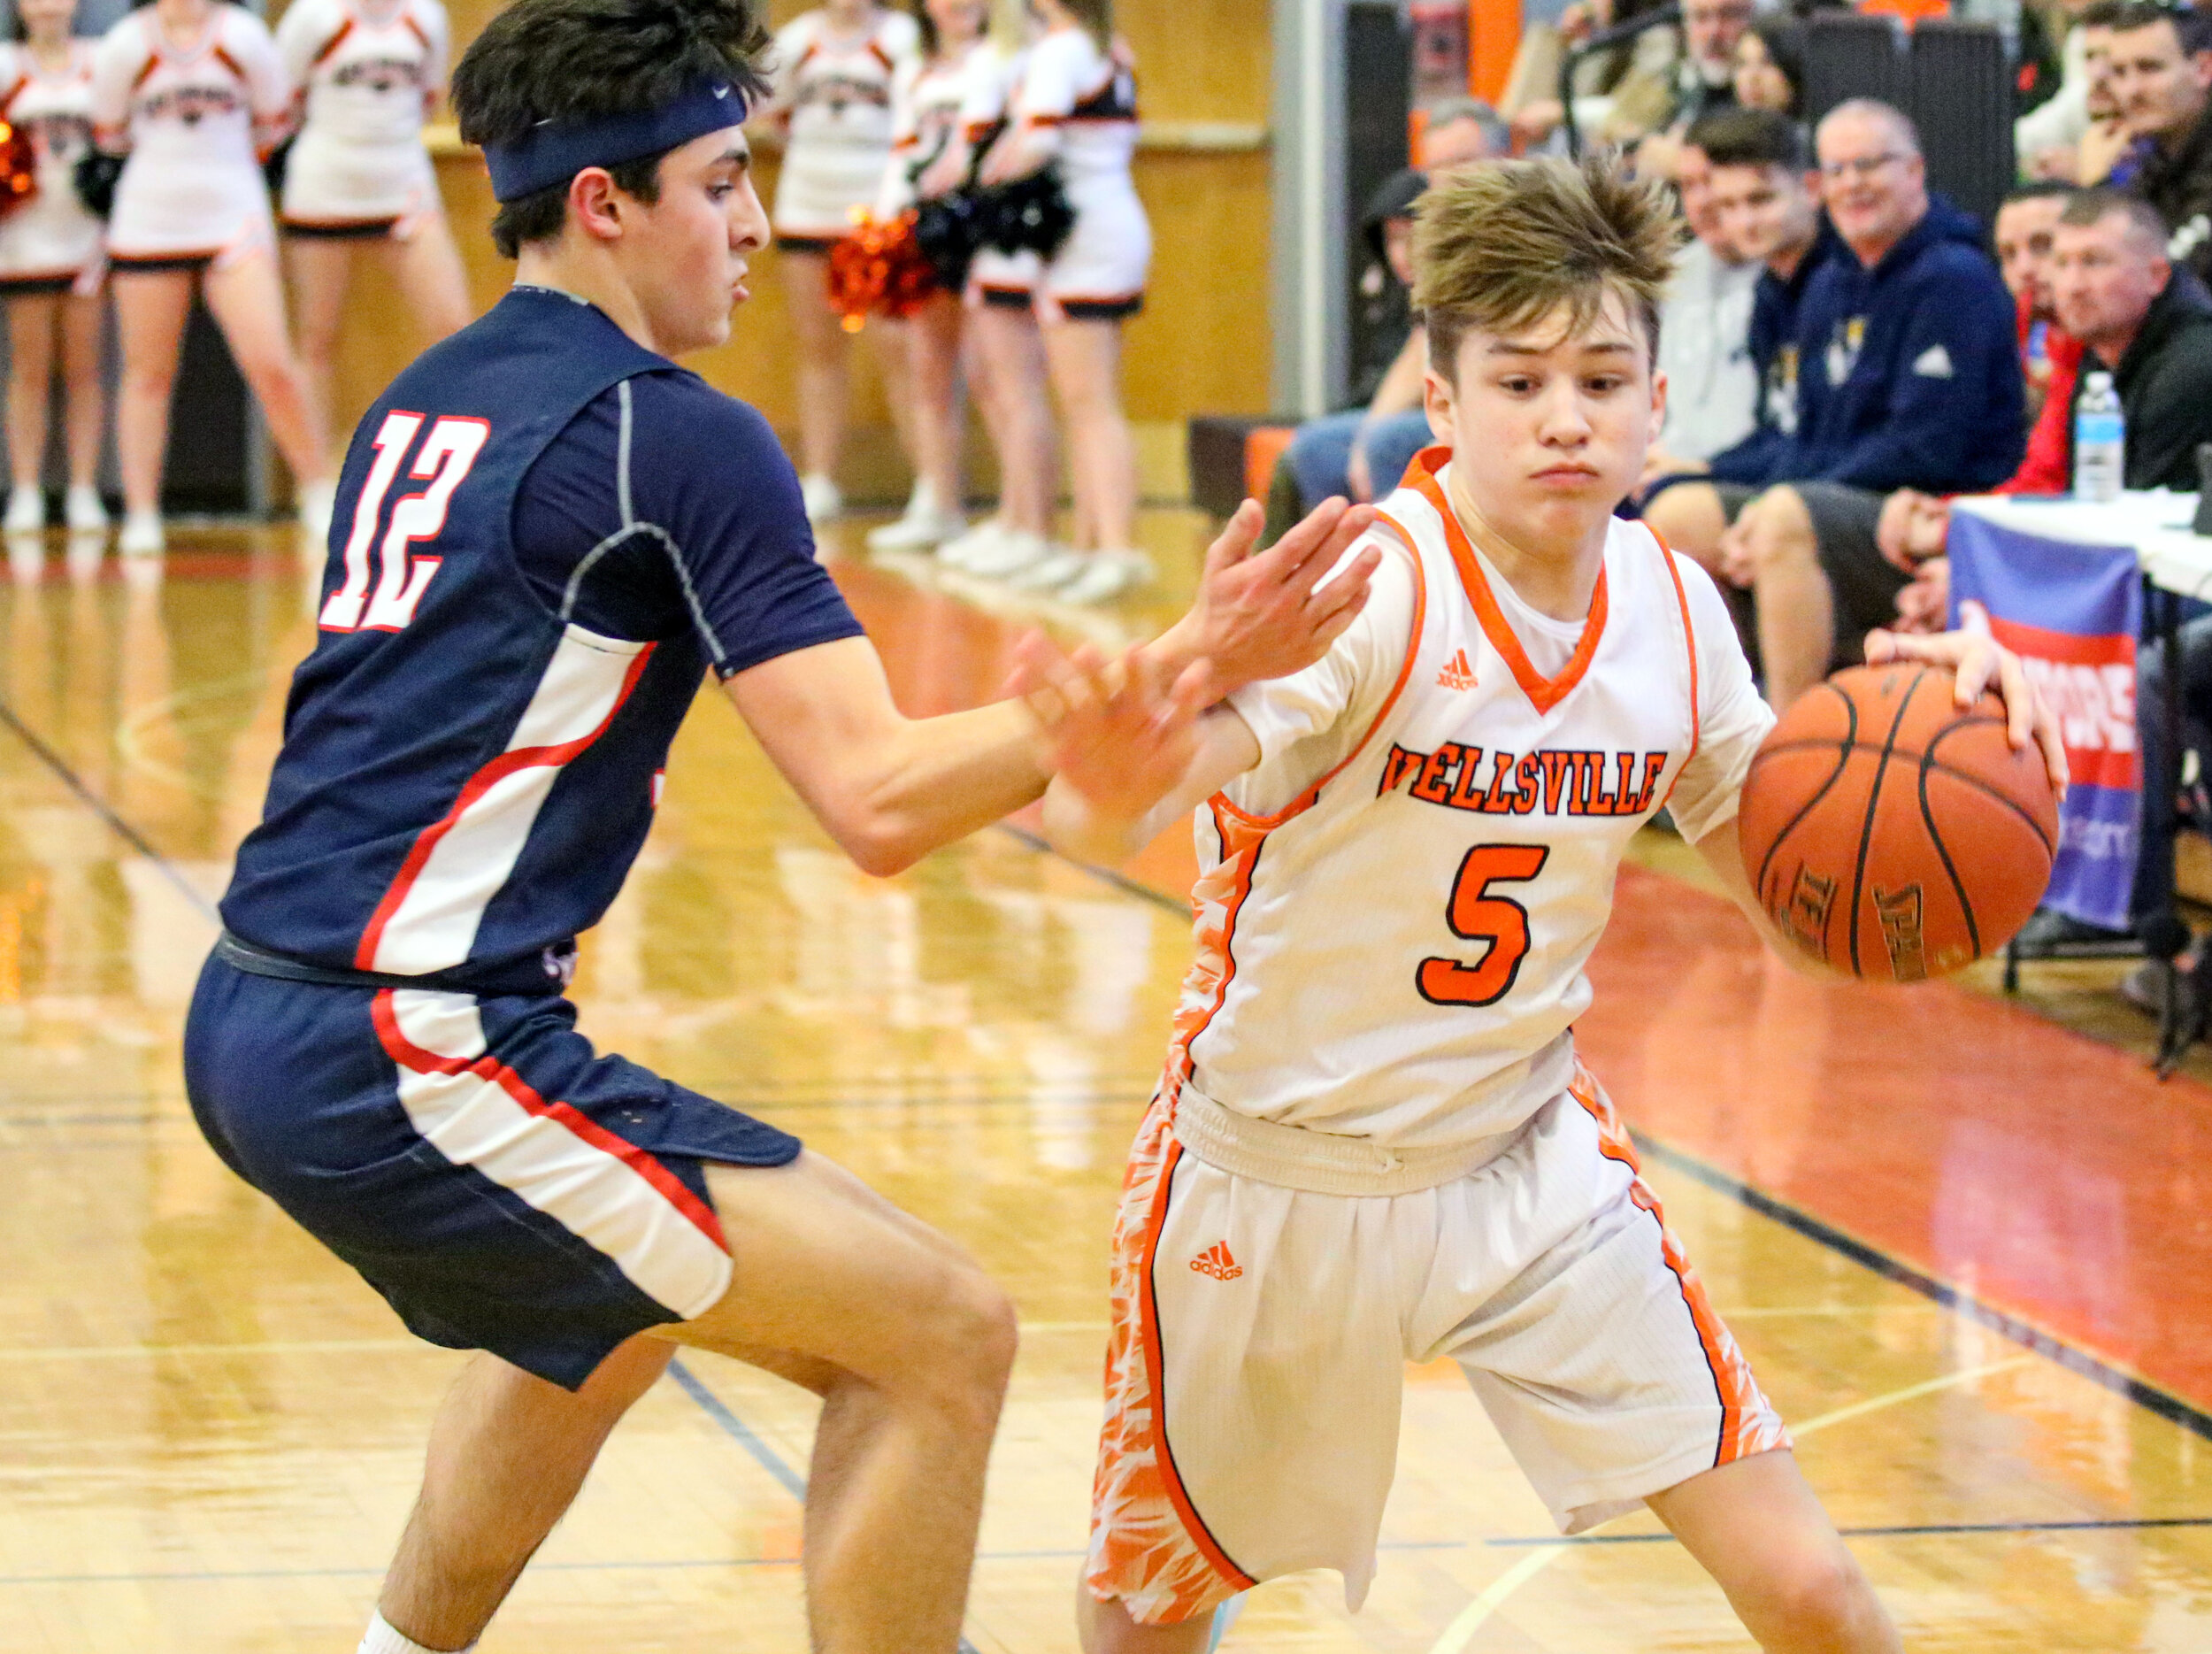  Wellsville sophomore Eli Schmidt (5) drives his way around the Mynderse defense on his way inside during Saturday afternoon’s Class B2 Quarterfinal matchup in Wellsville. [Chris Brooks/WellsvilleSports.com] 